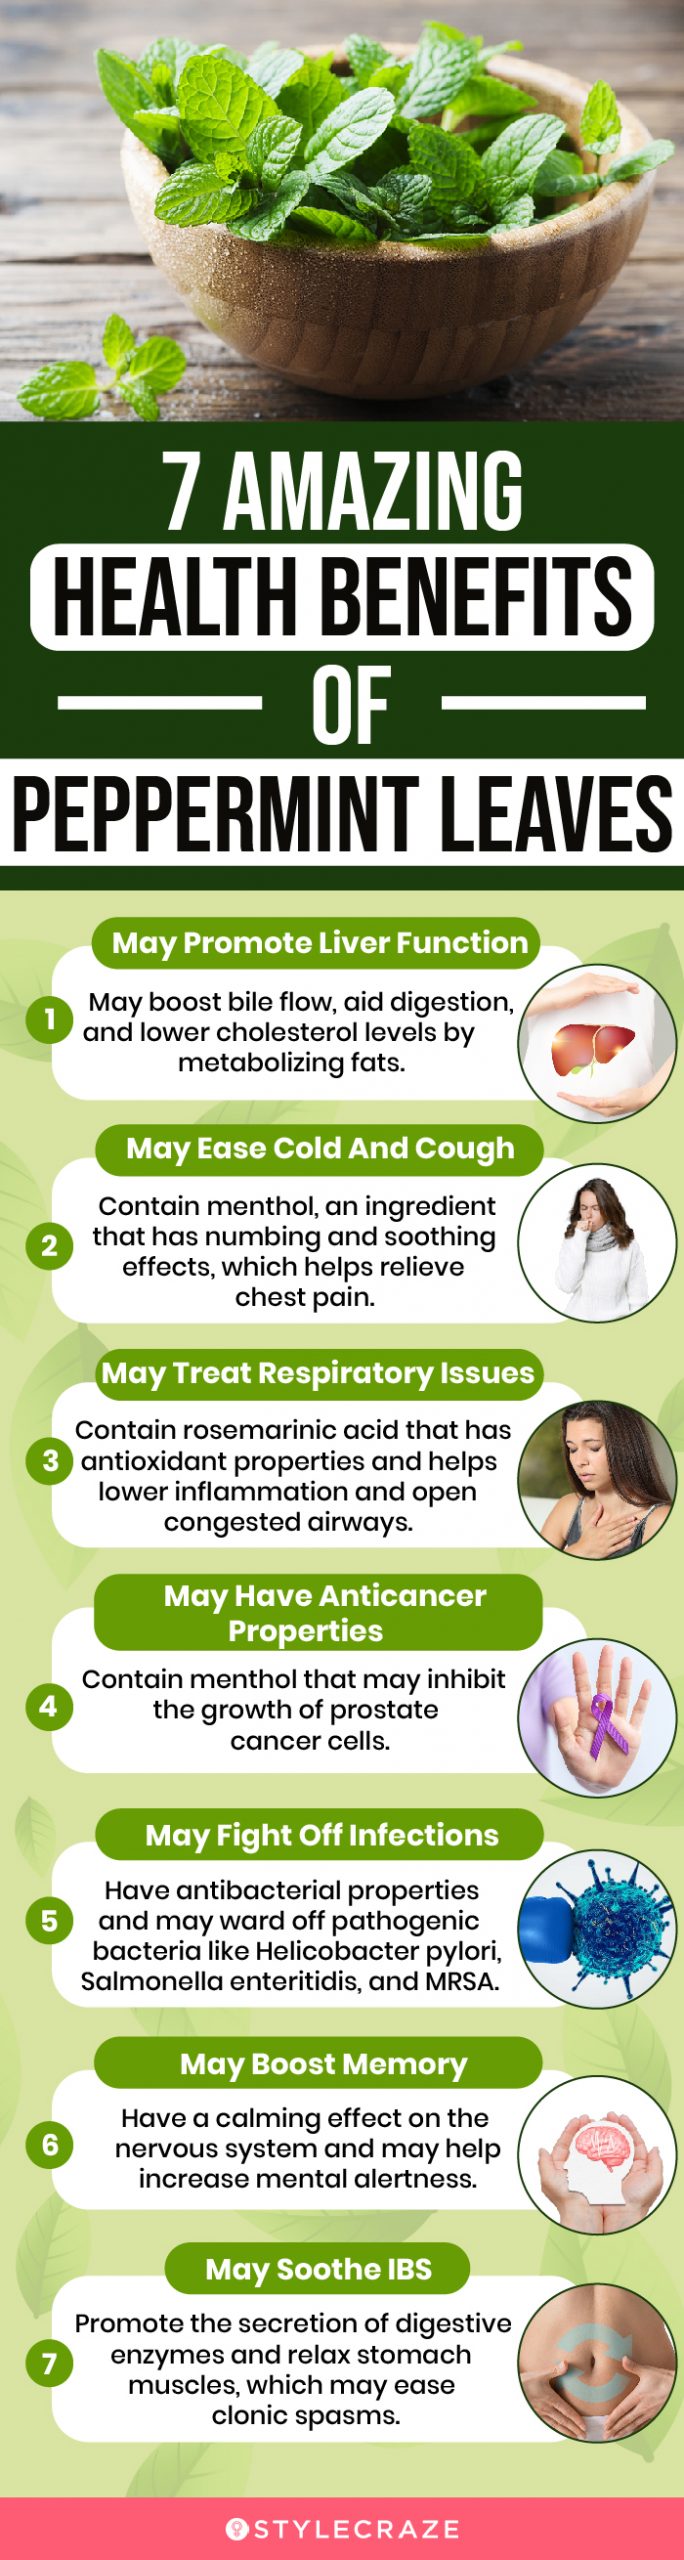 7 amazing health benefits of peppermint leaves (infographic)